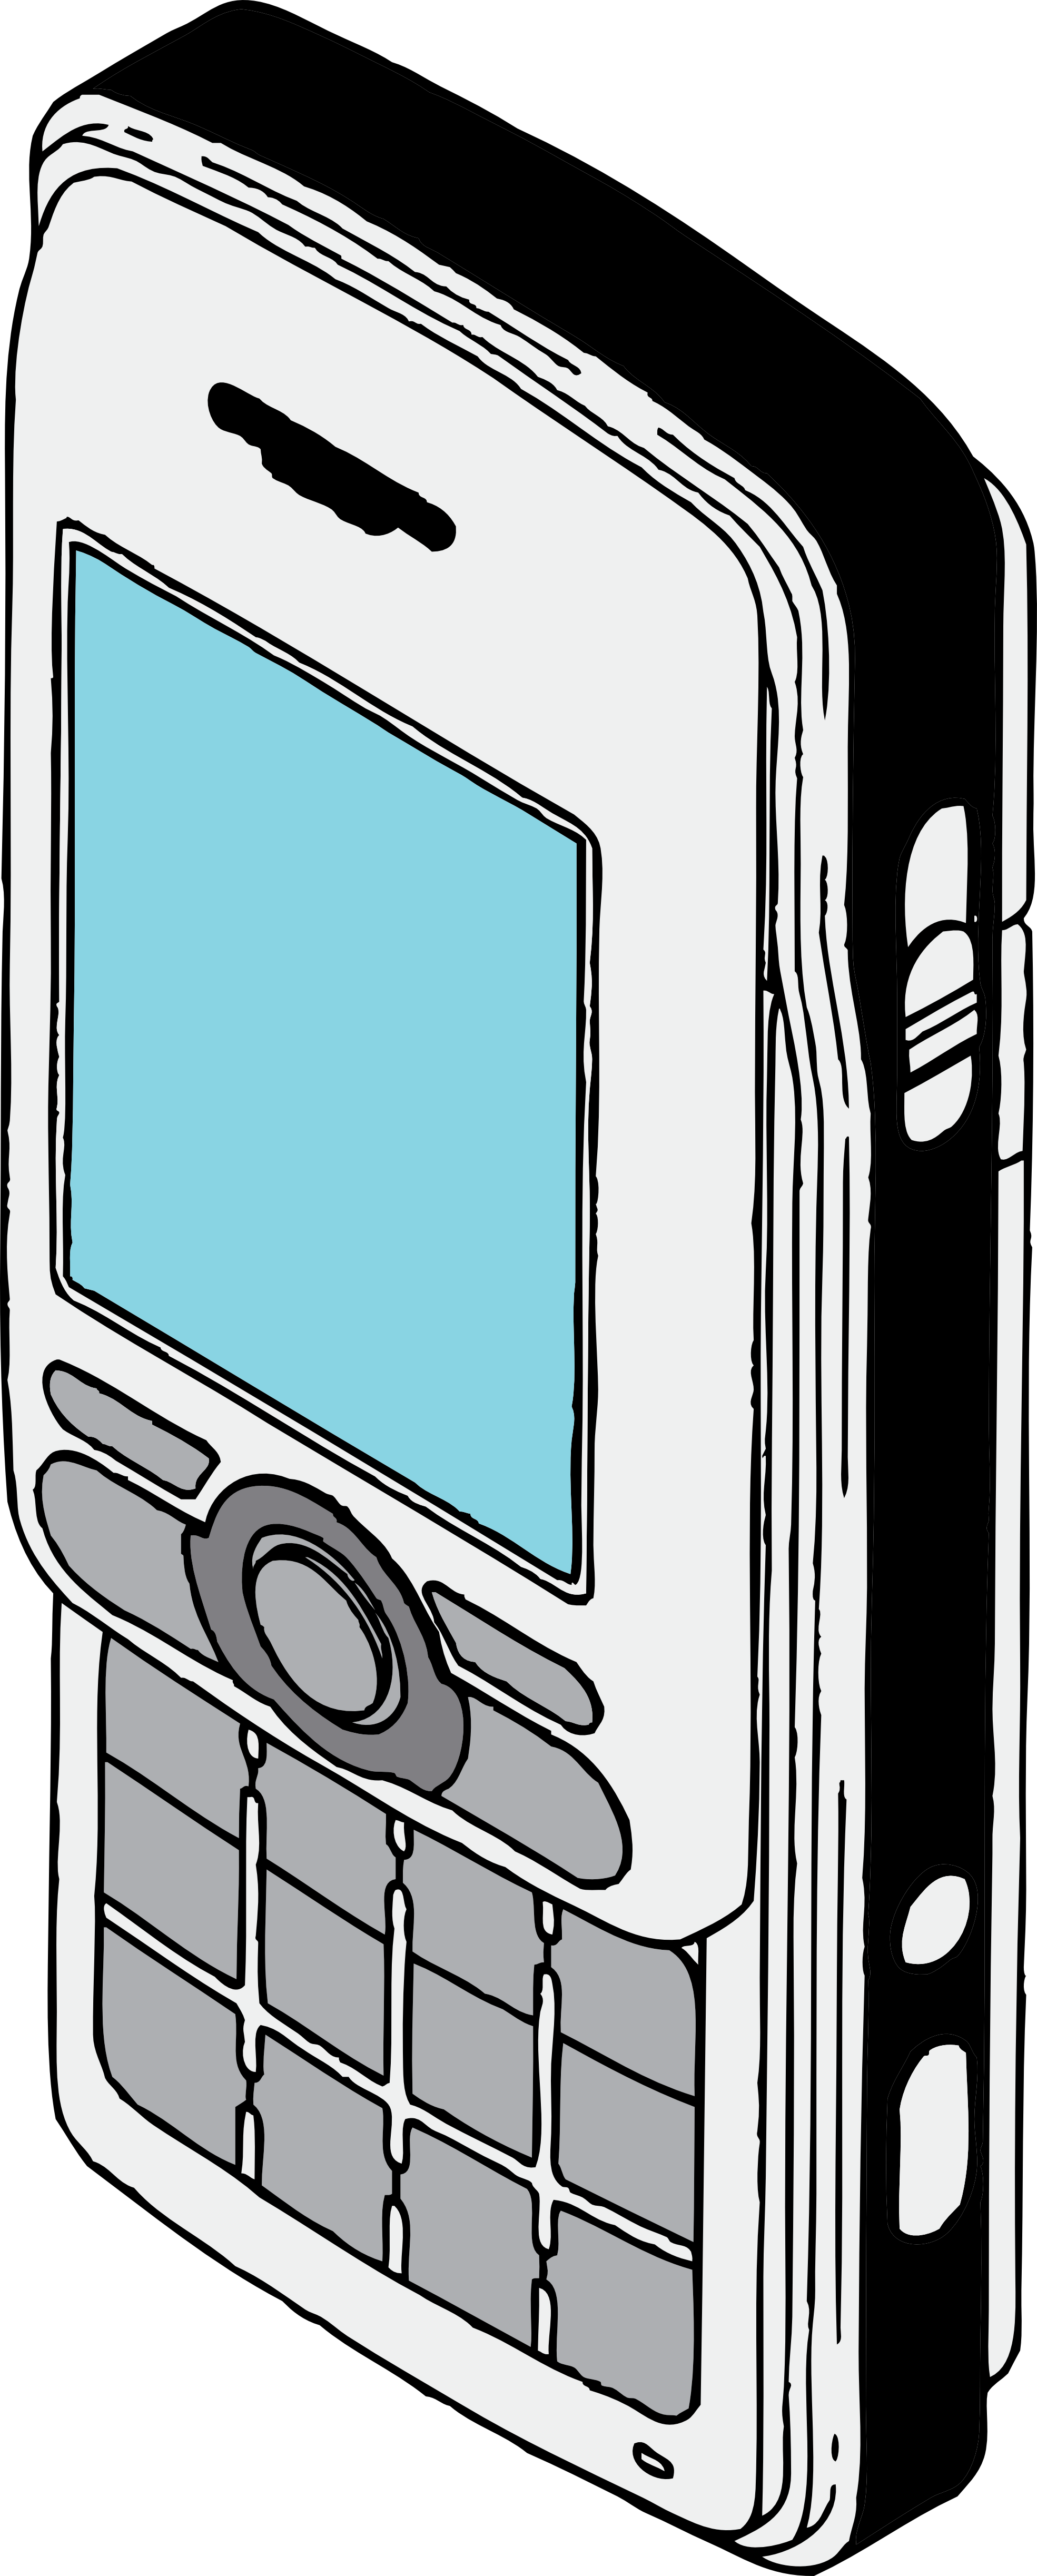 cell phone clipart - photo #33